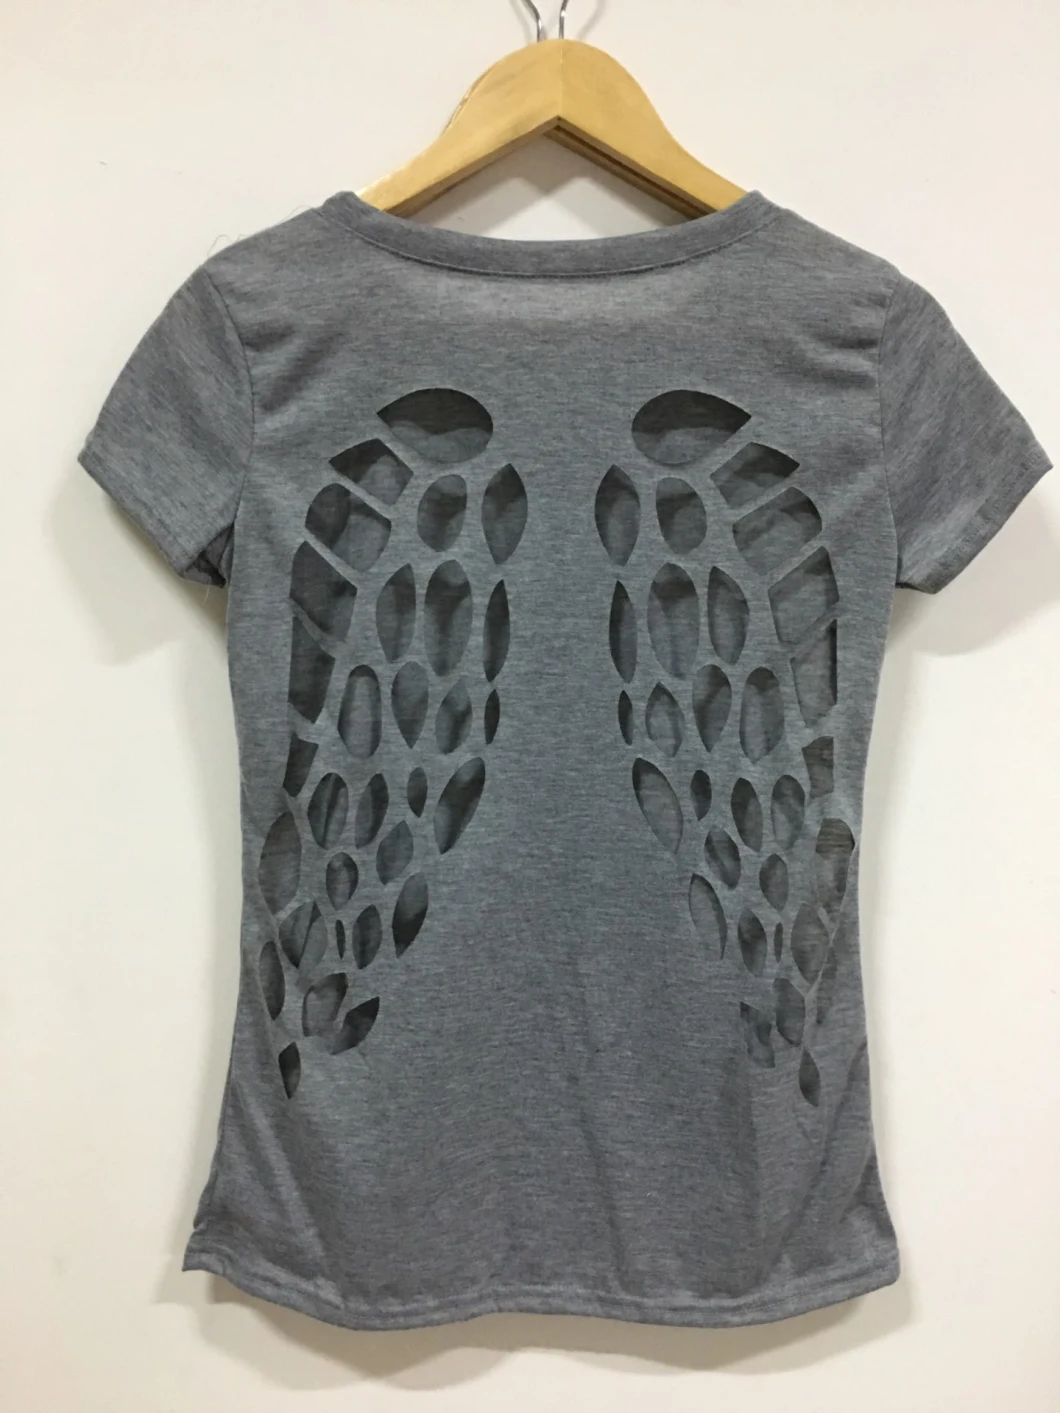 New Style Casual Backless Angel Wings Women's Tops T-Shirt (14206)